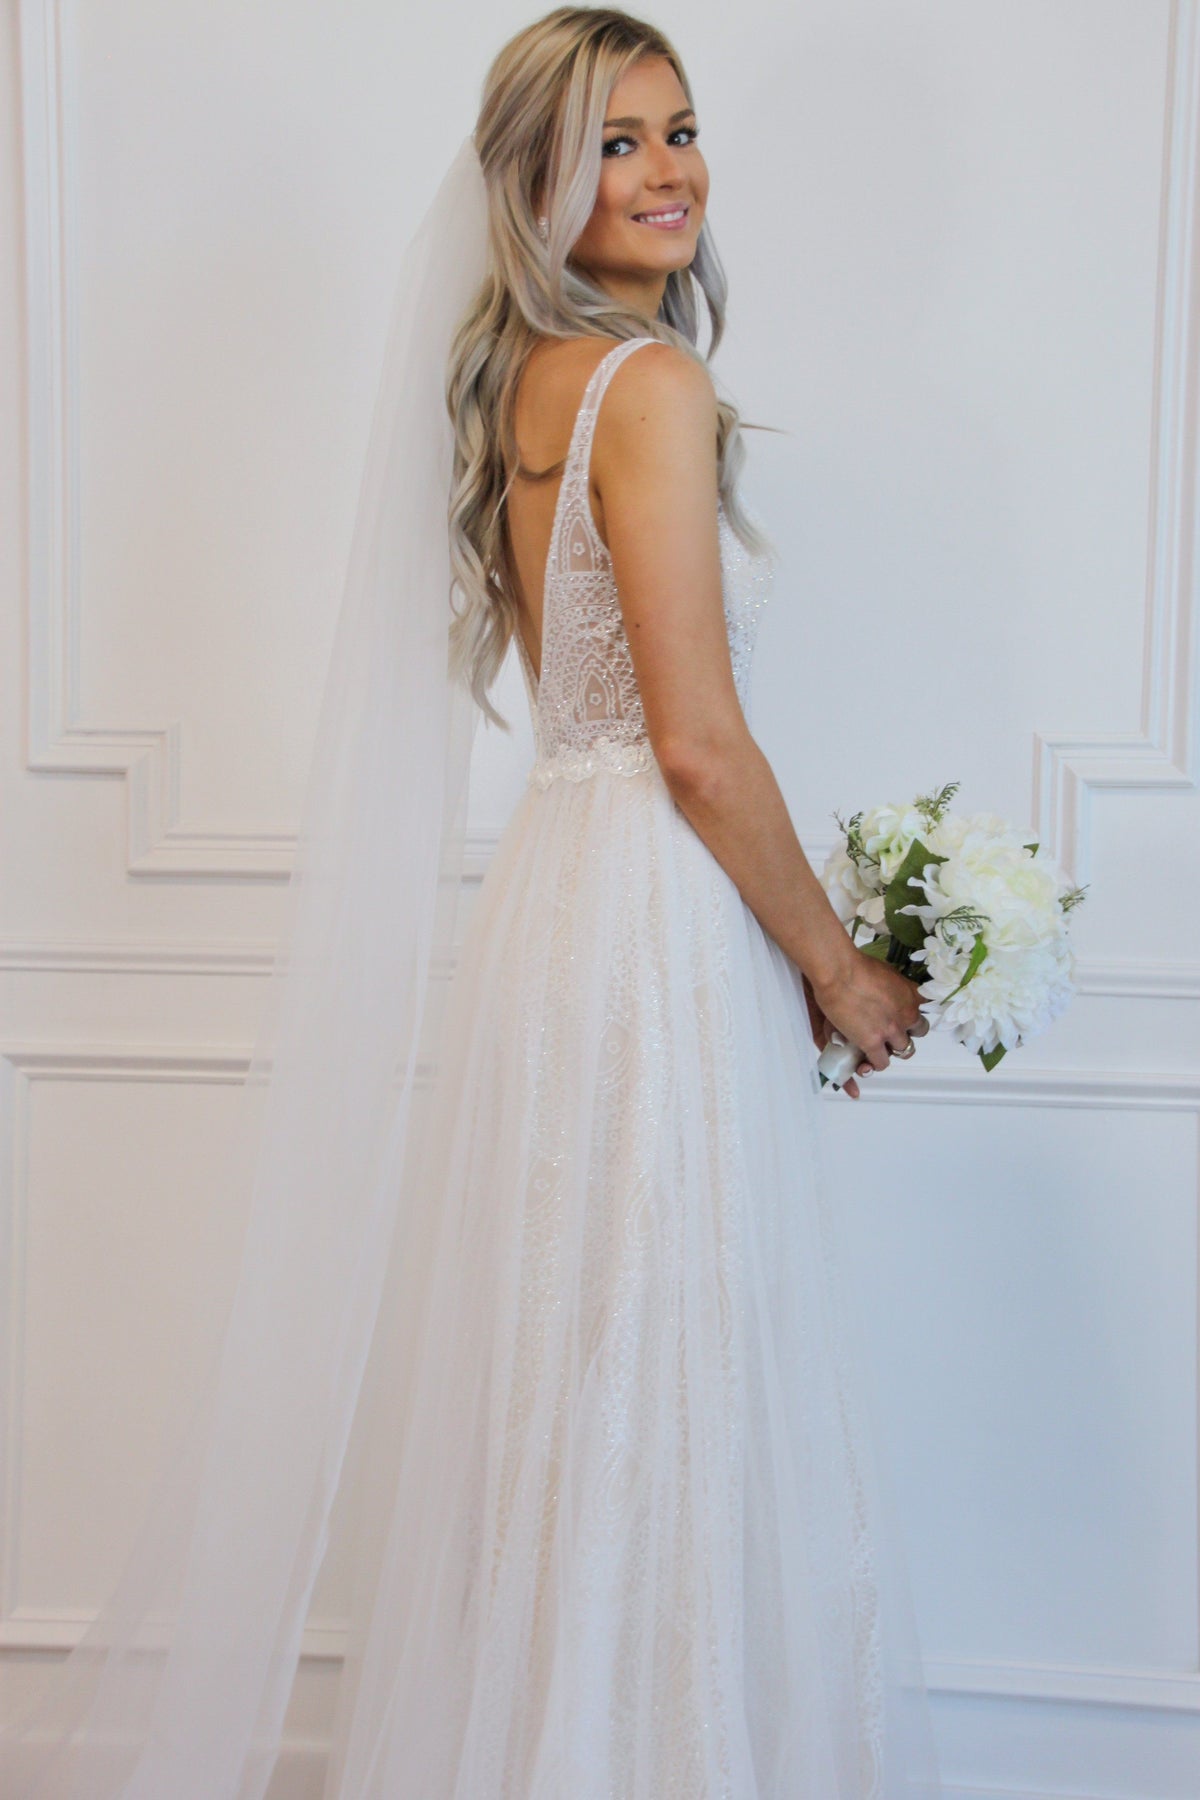 Bella and Bloom Boutique - Say I Do Lace Wedding Dress: Ivory/Nude